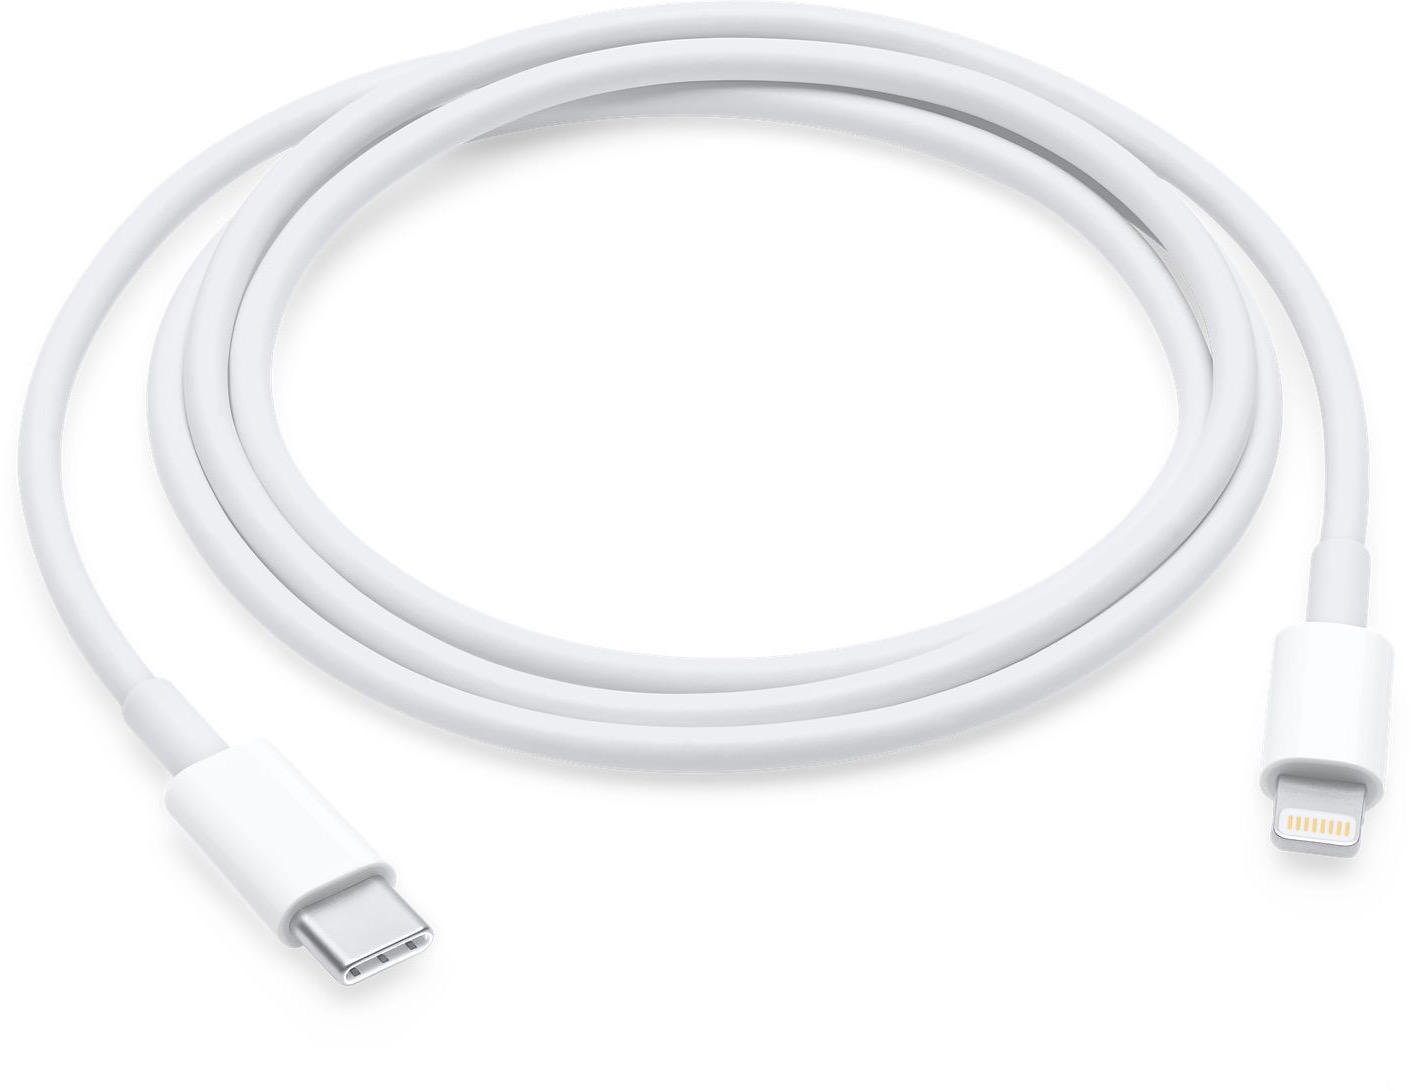 Lightning cables for USB-C with MFi certificate may arrive ahead of schedule